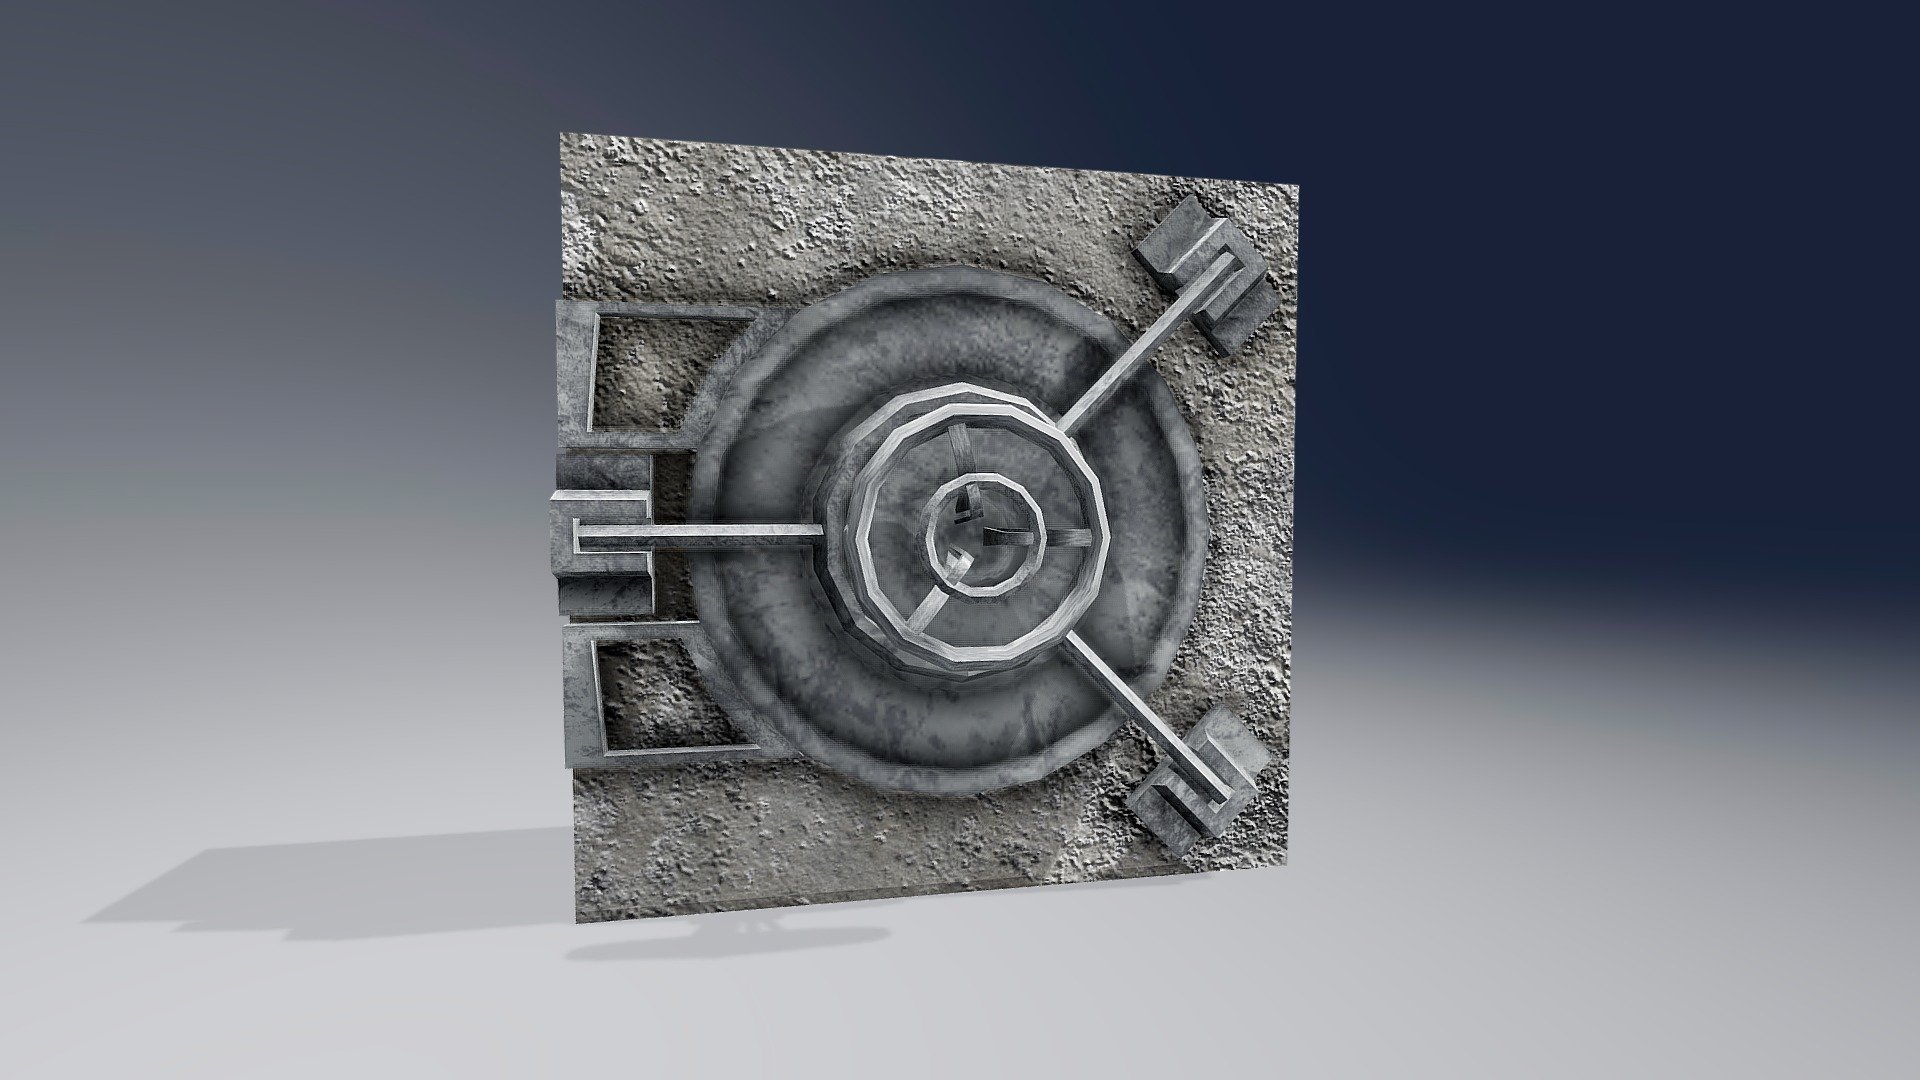 Animated vault door that is low poly made in maya, with struts that move to allow the vault to open using animated scale for the back, Textured in substance 3d painter - Vault door - Download Free 3D model by OrlandoL (@OllyOY) 3d model